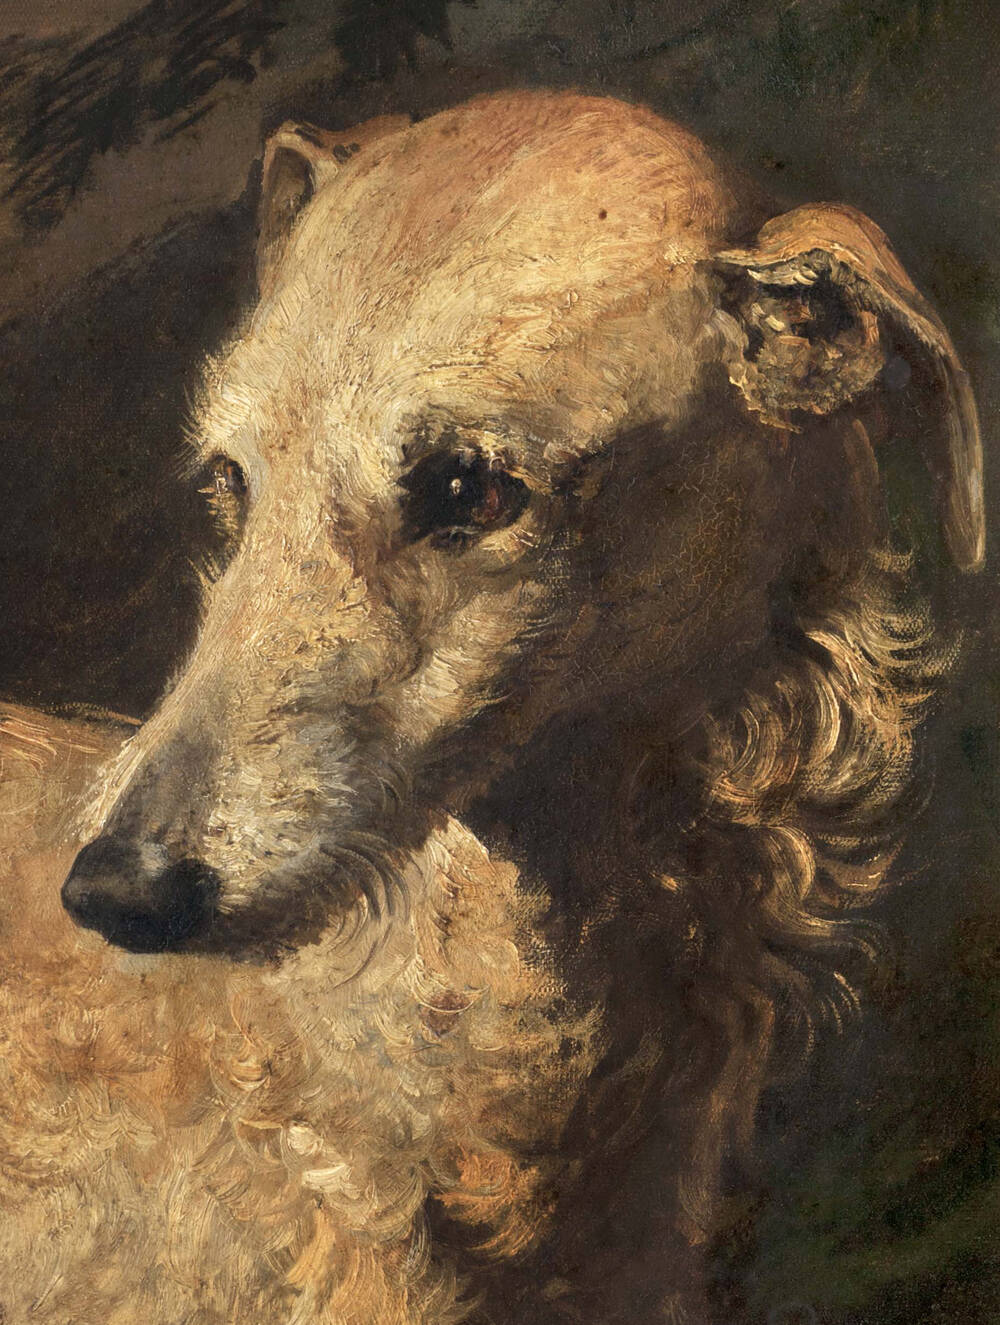 A close-up portrait of a golden brown deerhound, which is facing the artist but looking slightly to the left.